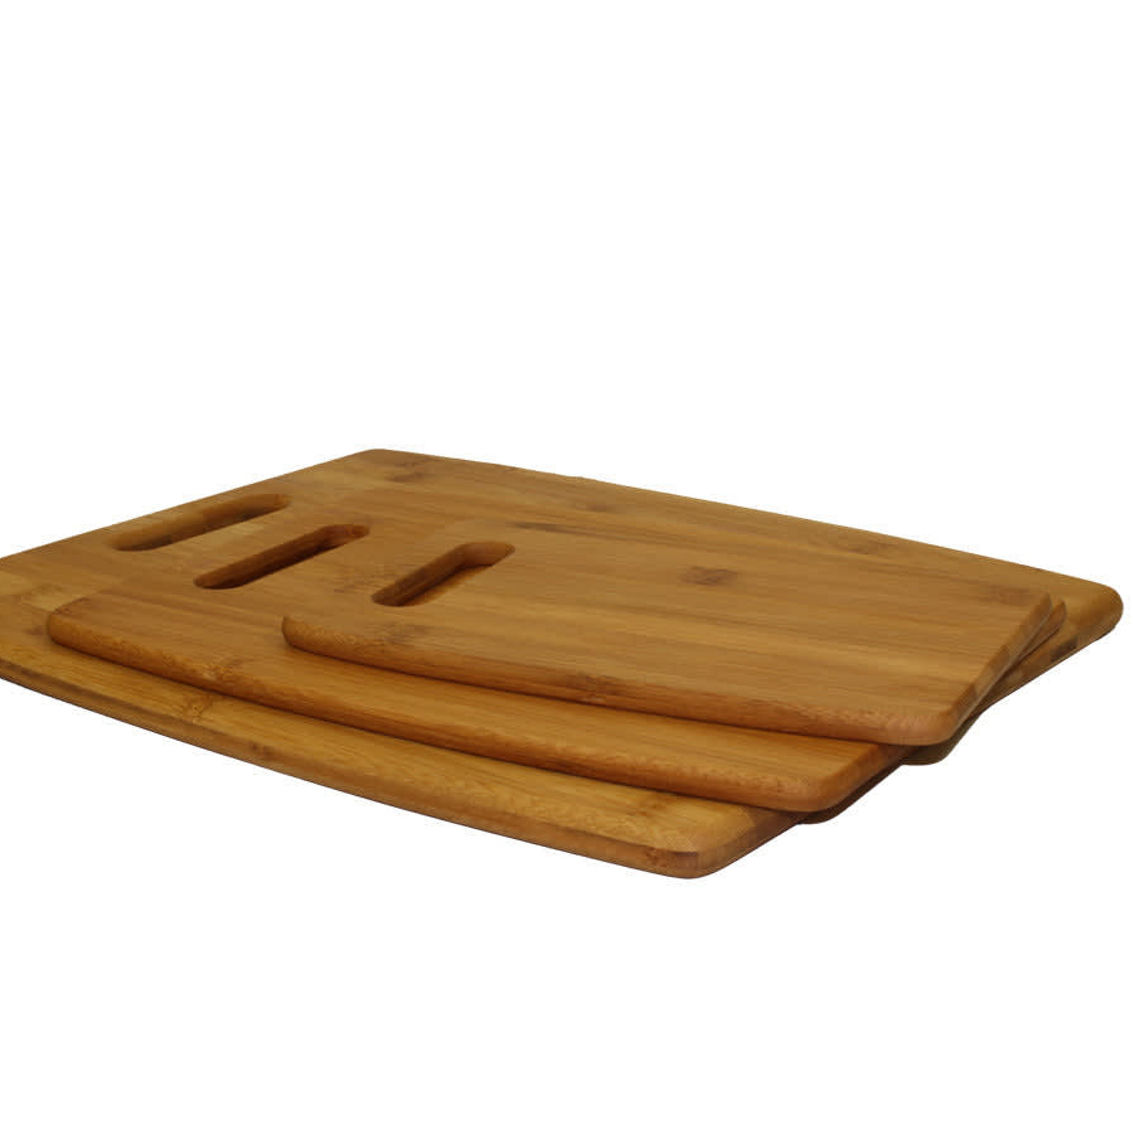 Oceanstar 3-Piece Bamboo Cutting Board Set - Image 3 of 4